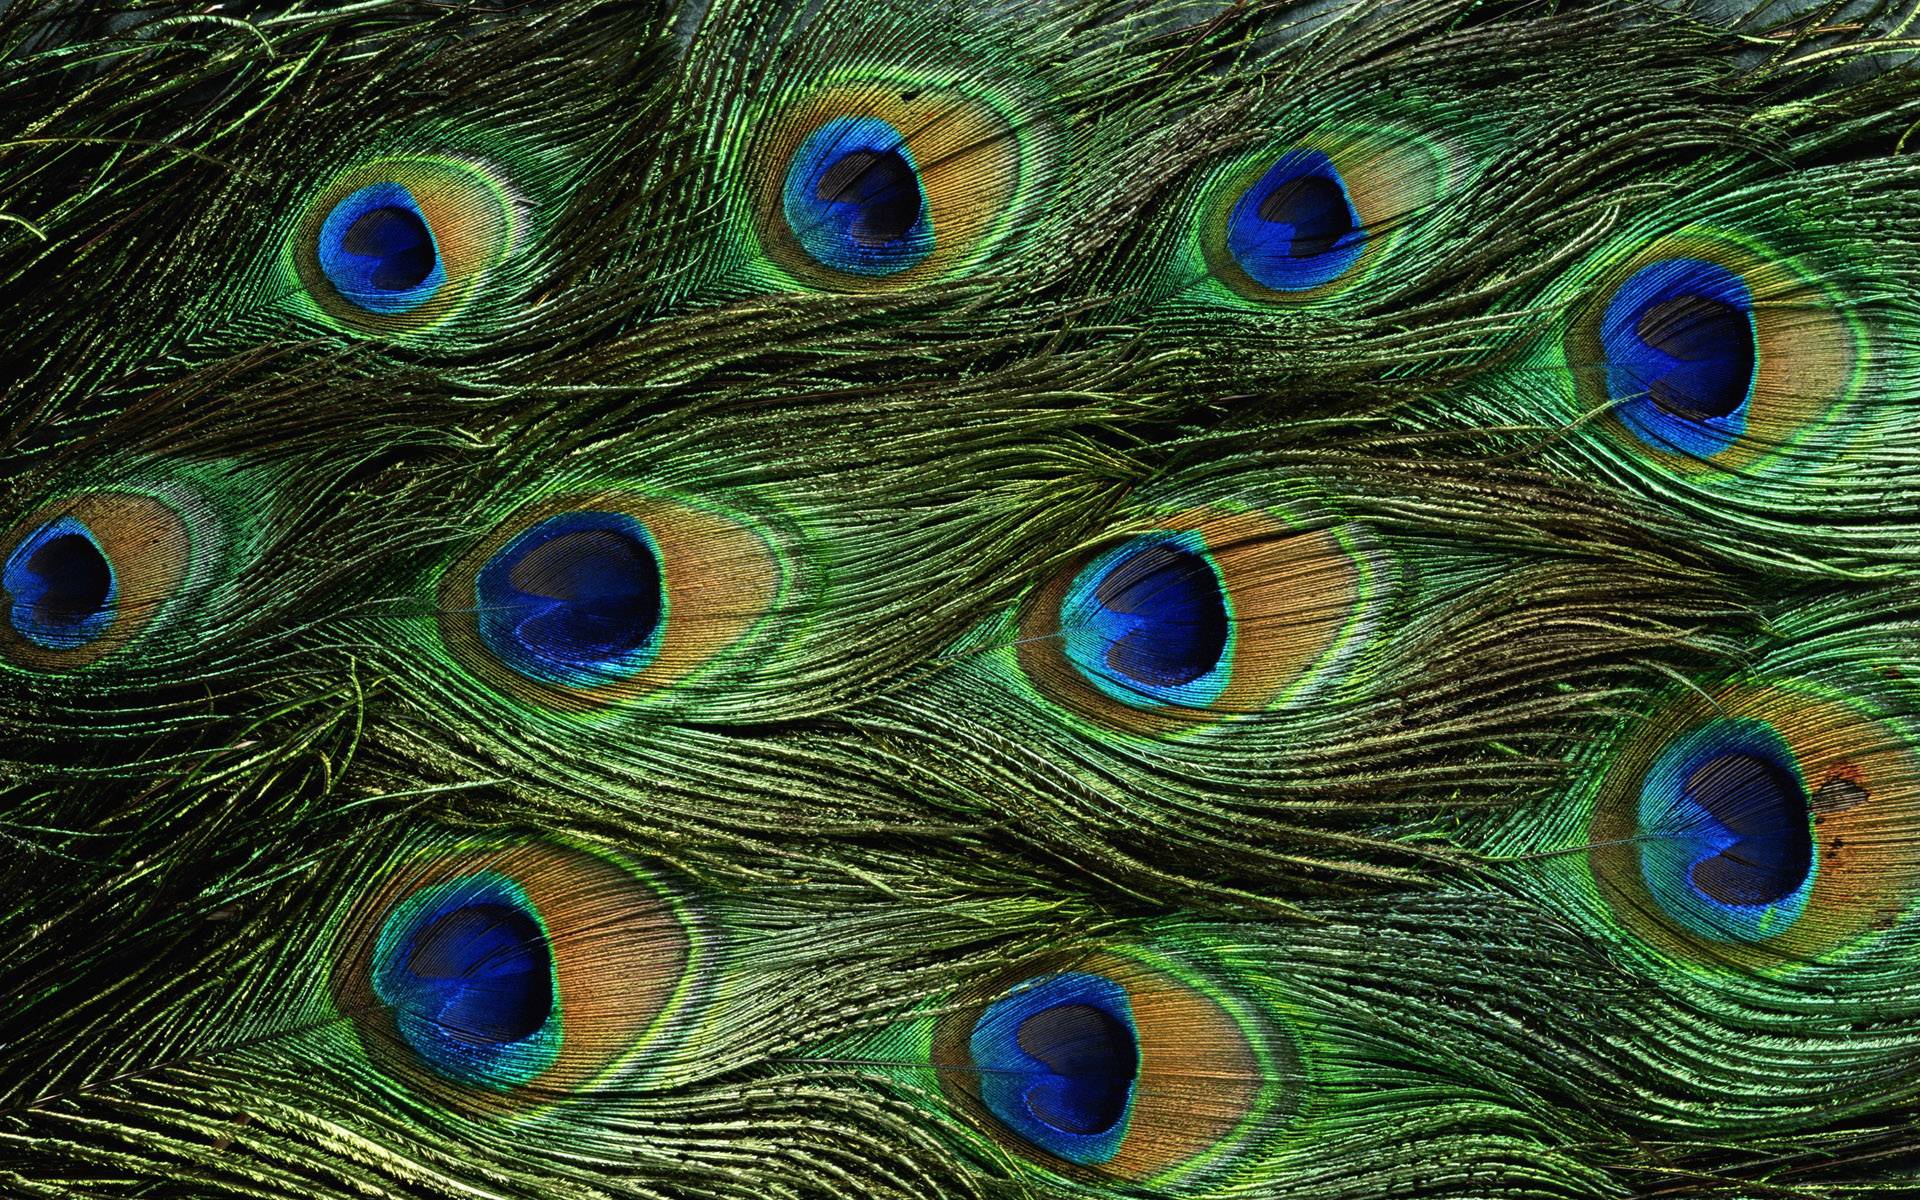 Peacock feathers wallpaper